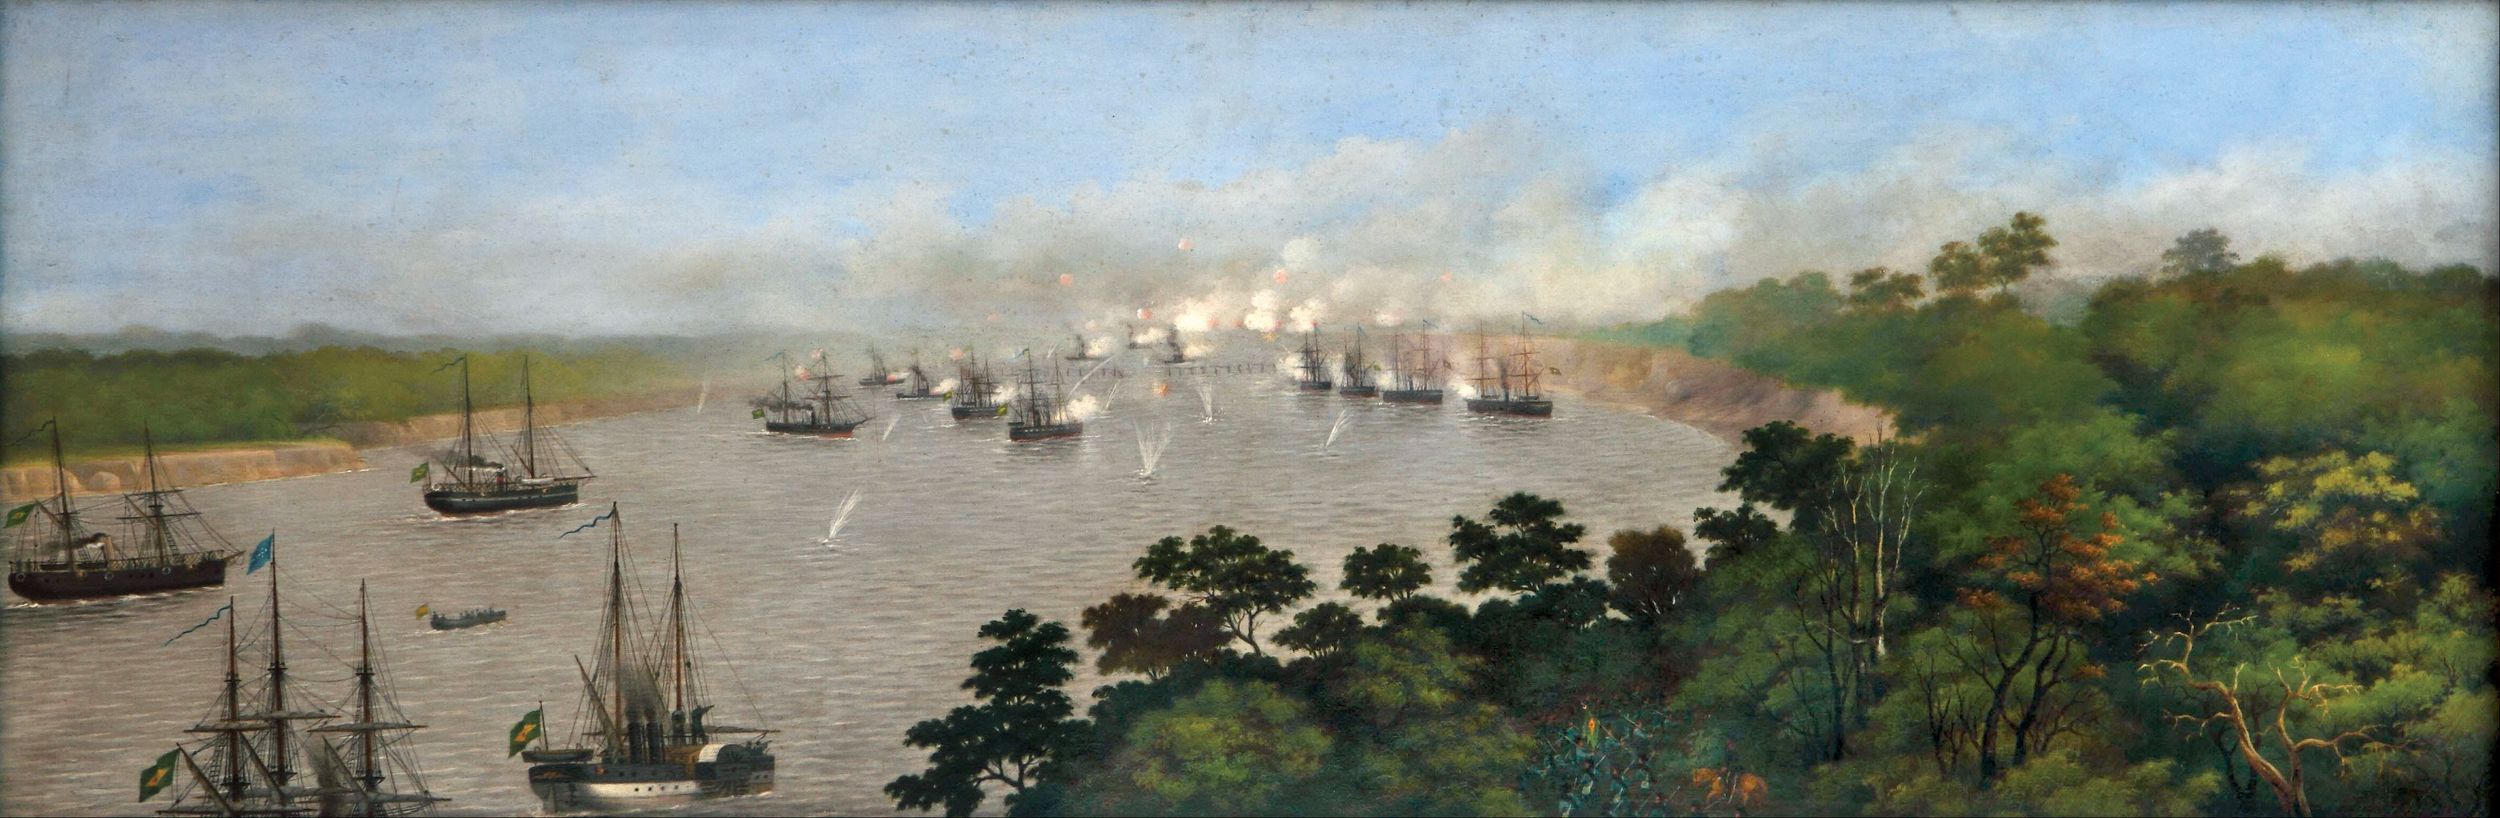 At the Battle of Curupaity, on September 22, 1866, the Brazilian navy shelled Paraguayan trenches to little effect. Allied losses were nearly 1,000 men.